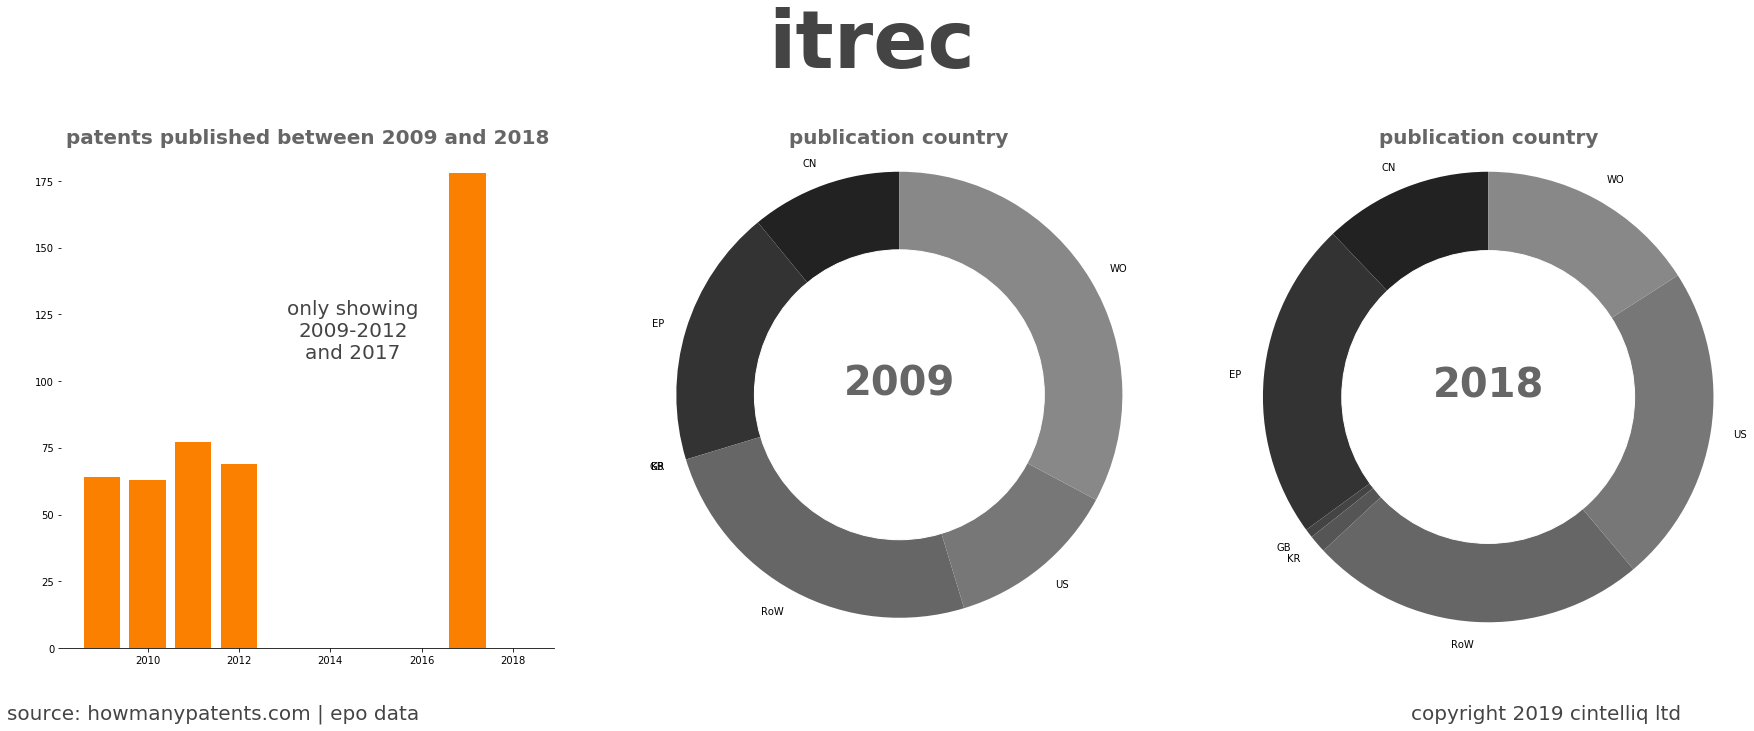 summary of patents for Itrec